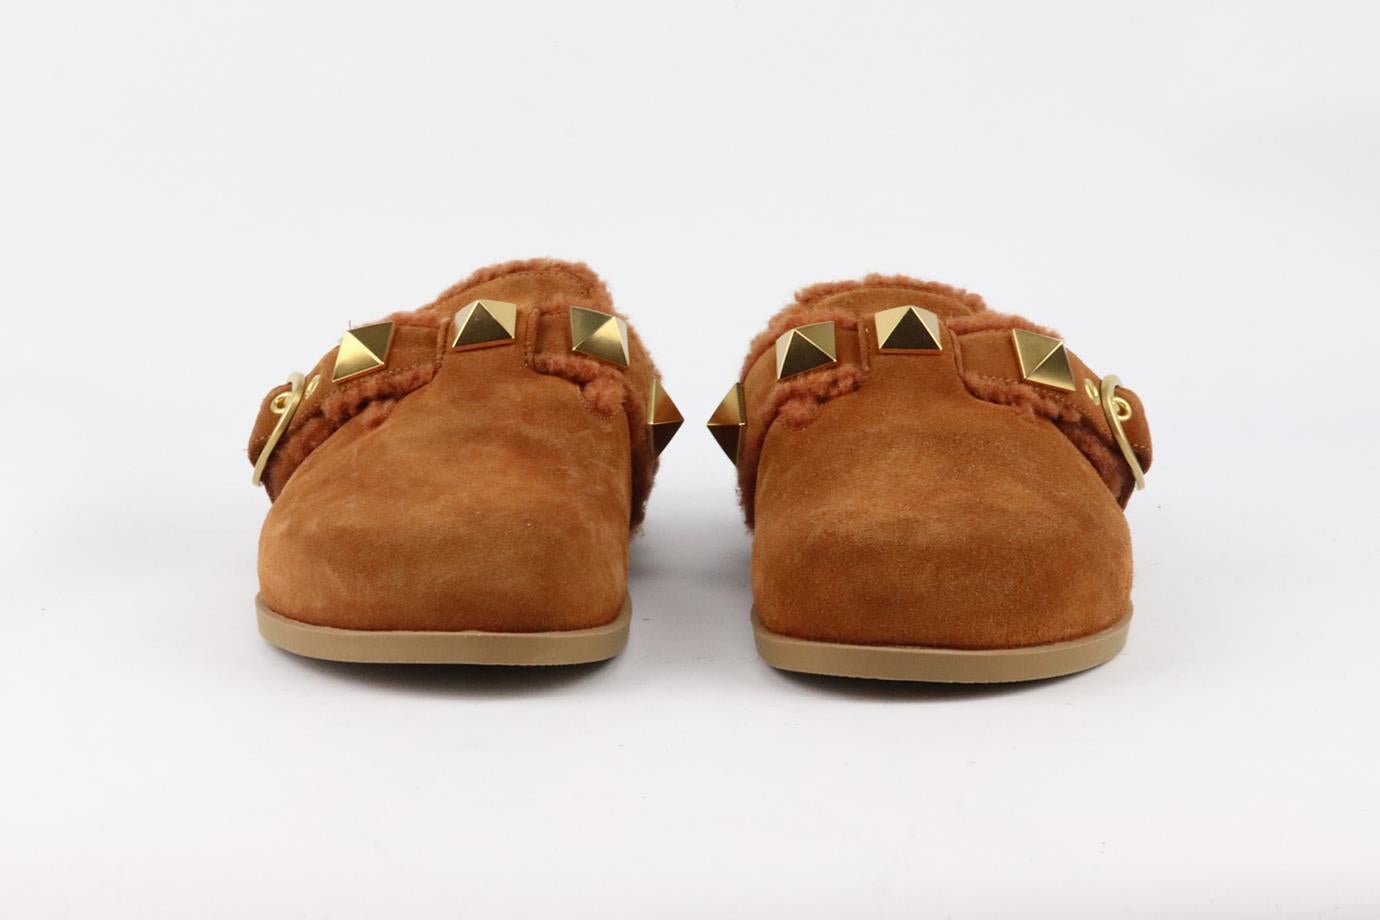 These 'Sabot' slippers by Valentino Garavani are designed in this season's trending clog silhouette, decorated with the label's signature oversized embellishments, they're made from smooth suede and have a wool-blend lining that feels so cozy. Heel